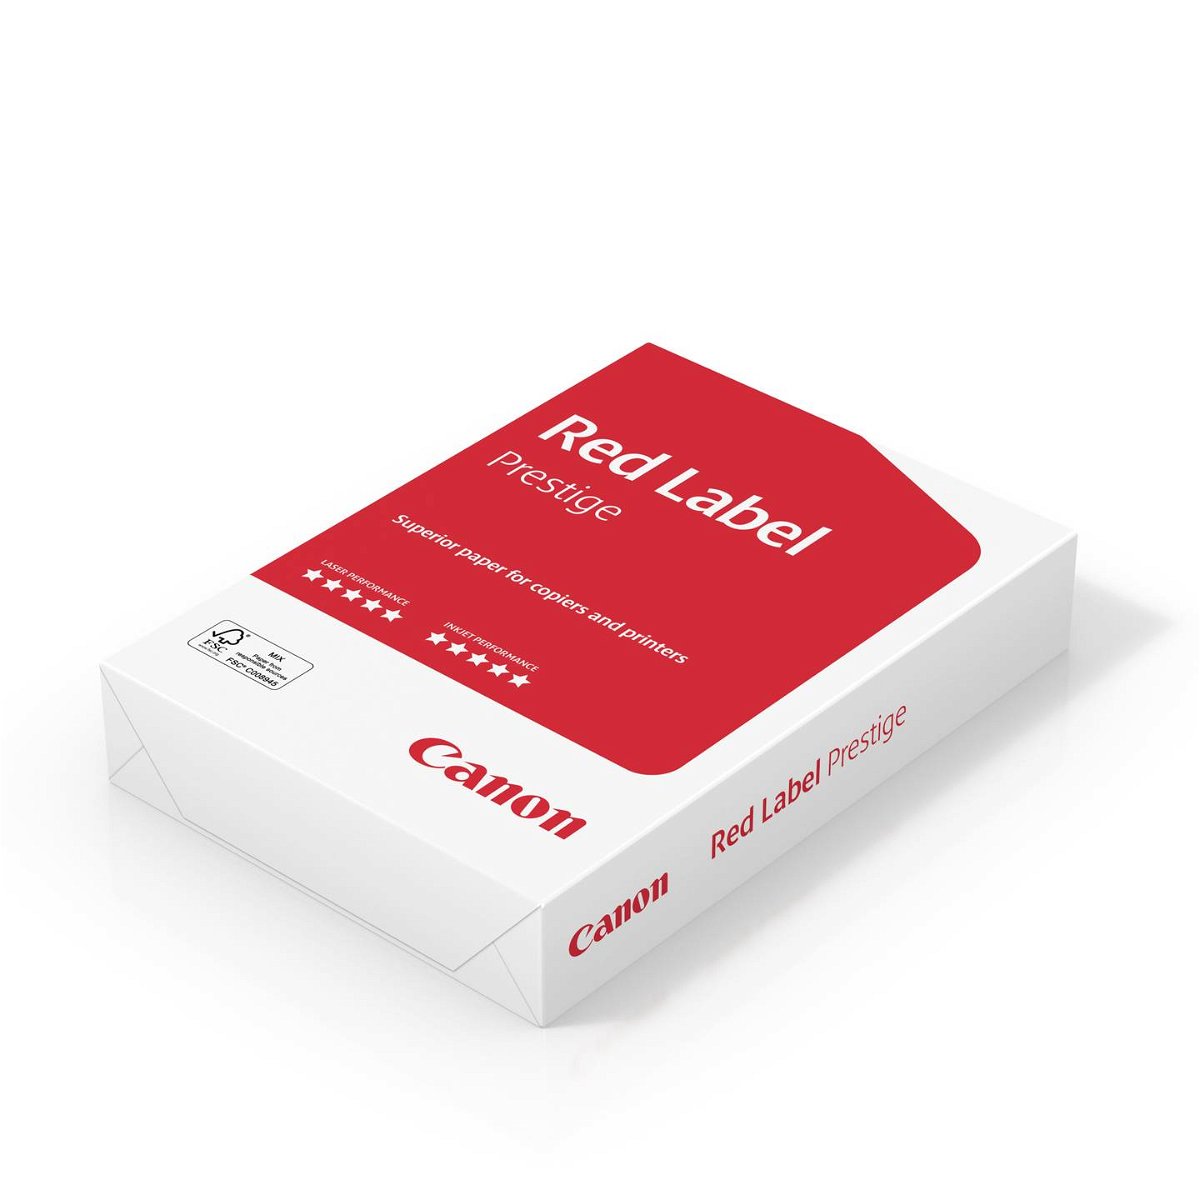 Canon Red Label Prestige Universal Printing Paper A4 80 g/m² 500 Sheets White